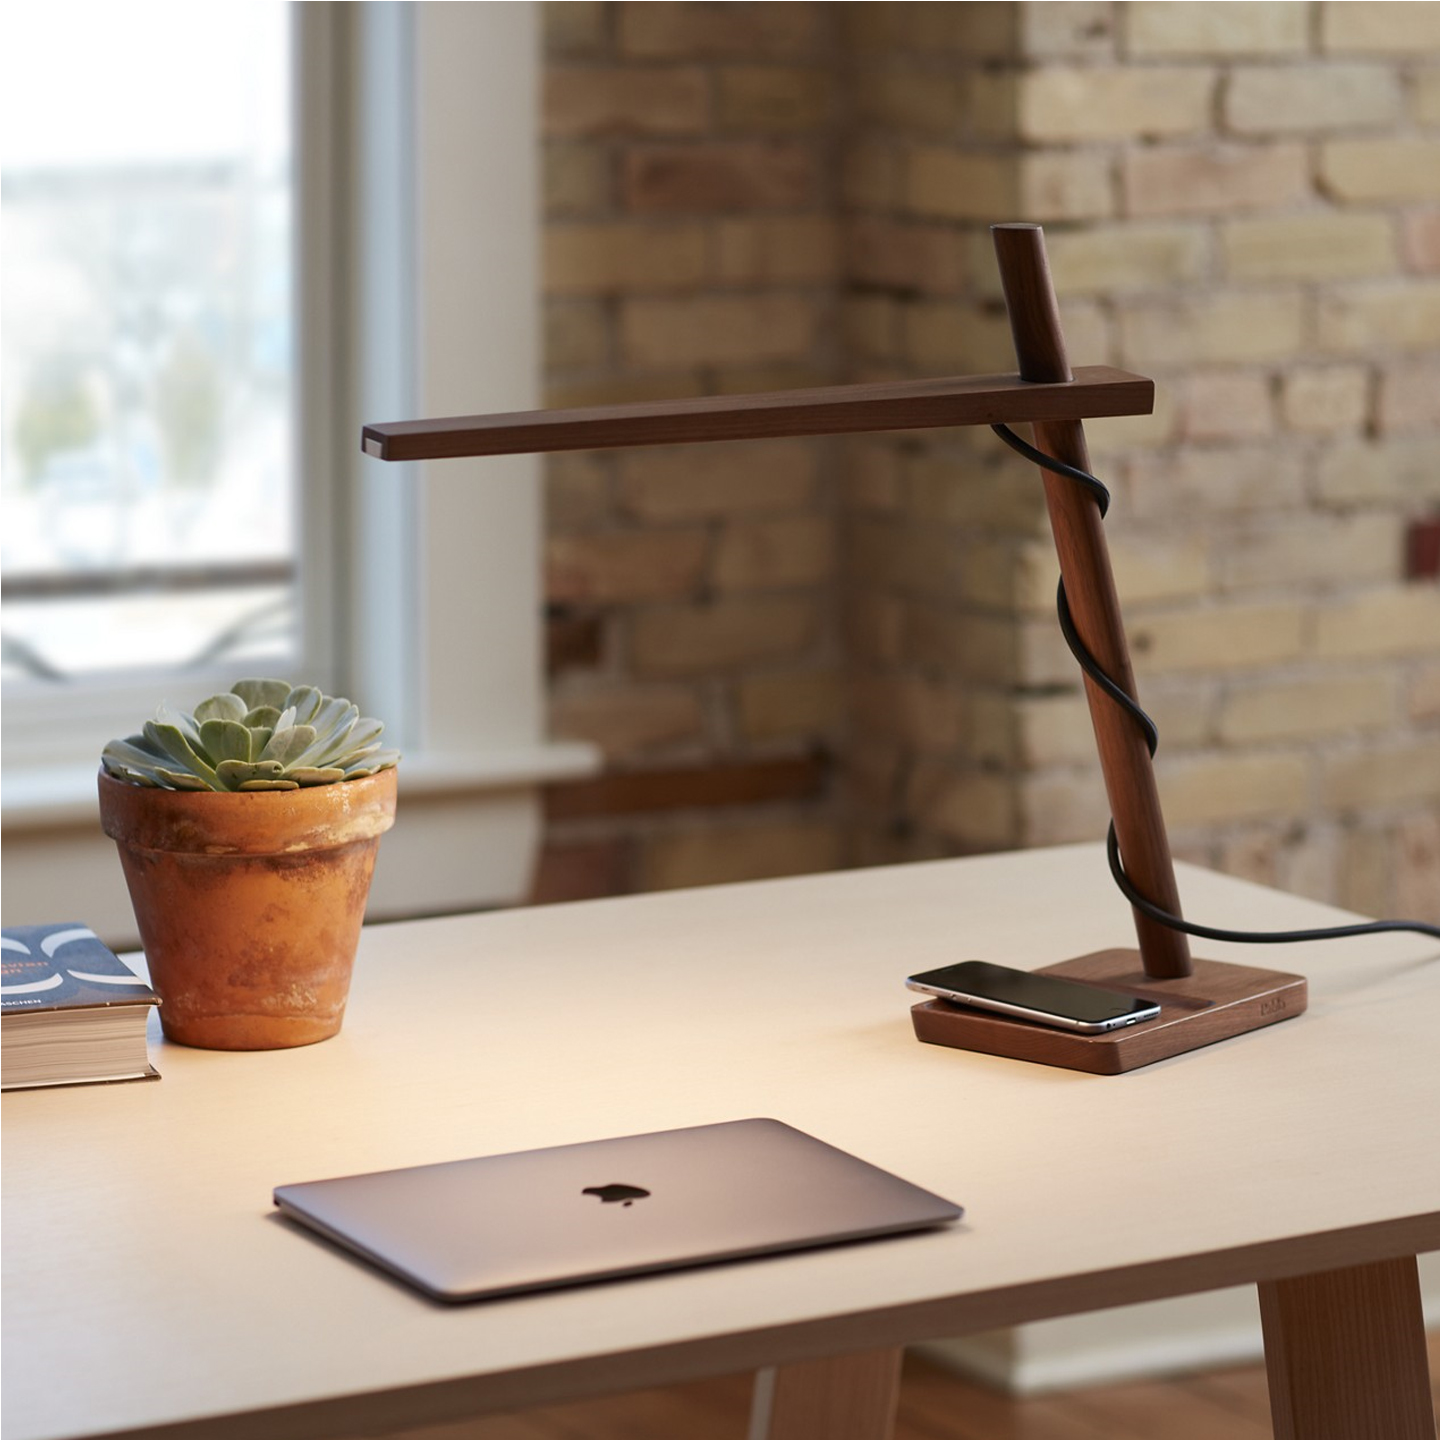 Haworth Clamp Lighting in dark wood on office desk with laptop and plant in open office space